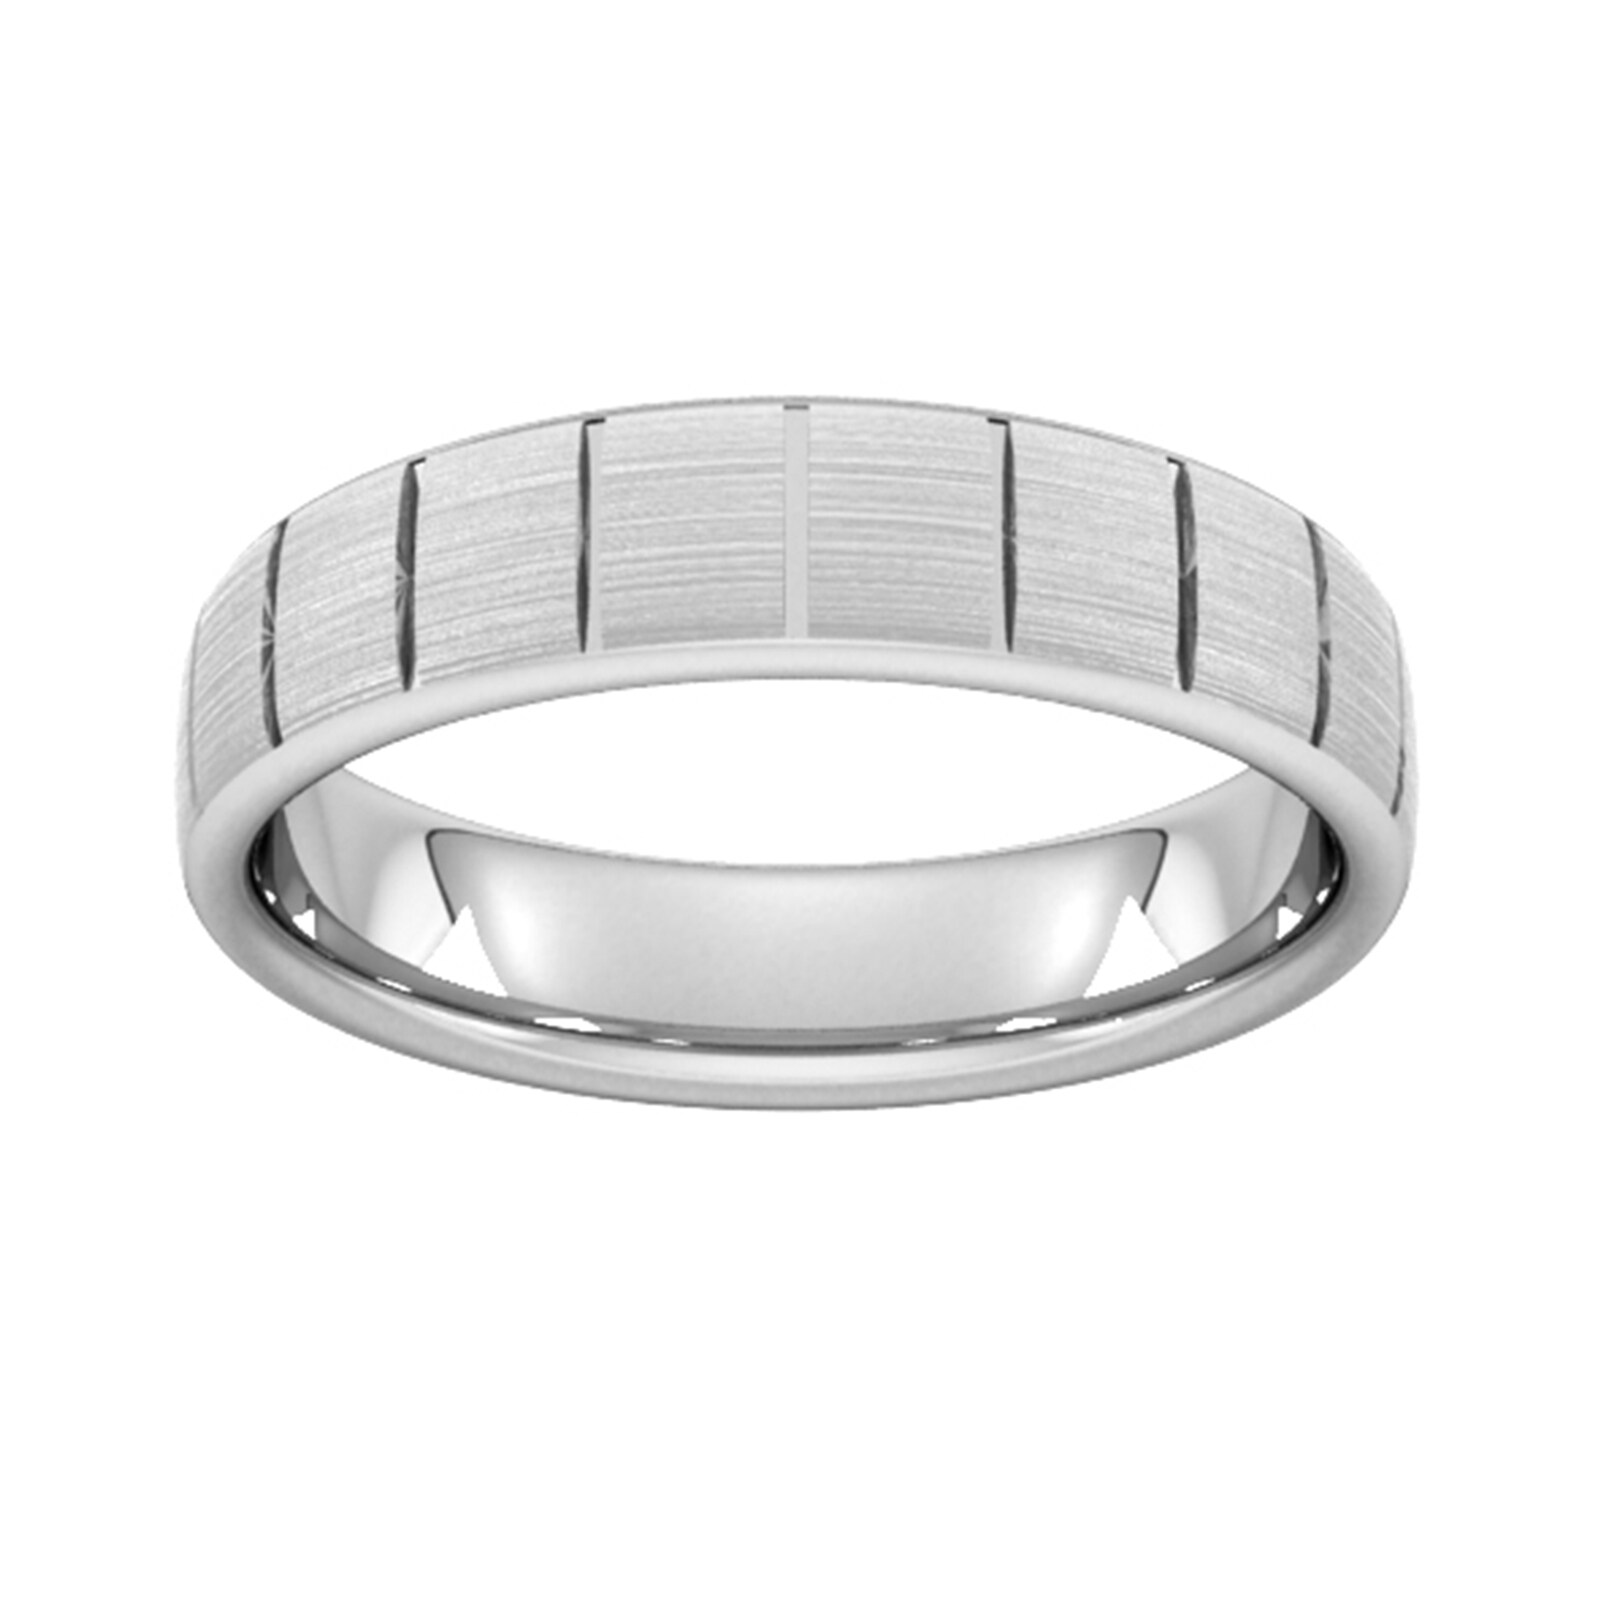 4mm D Shape Heavy Vertical Lines Wedding Ring In 9 Carat White Gold - Ring Size R